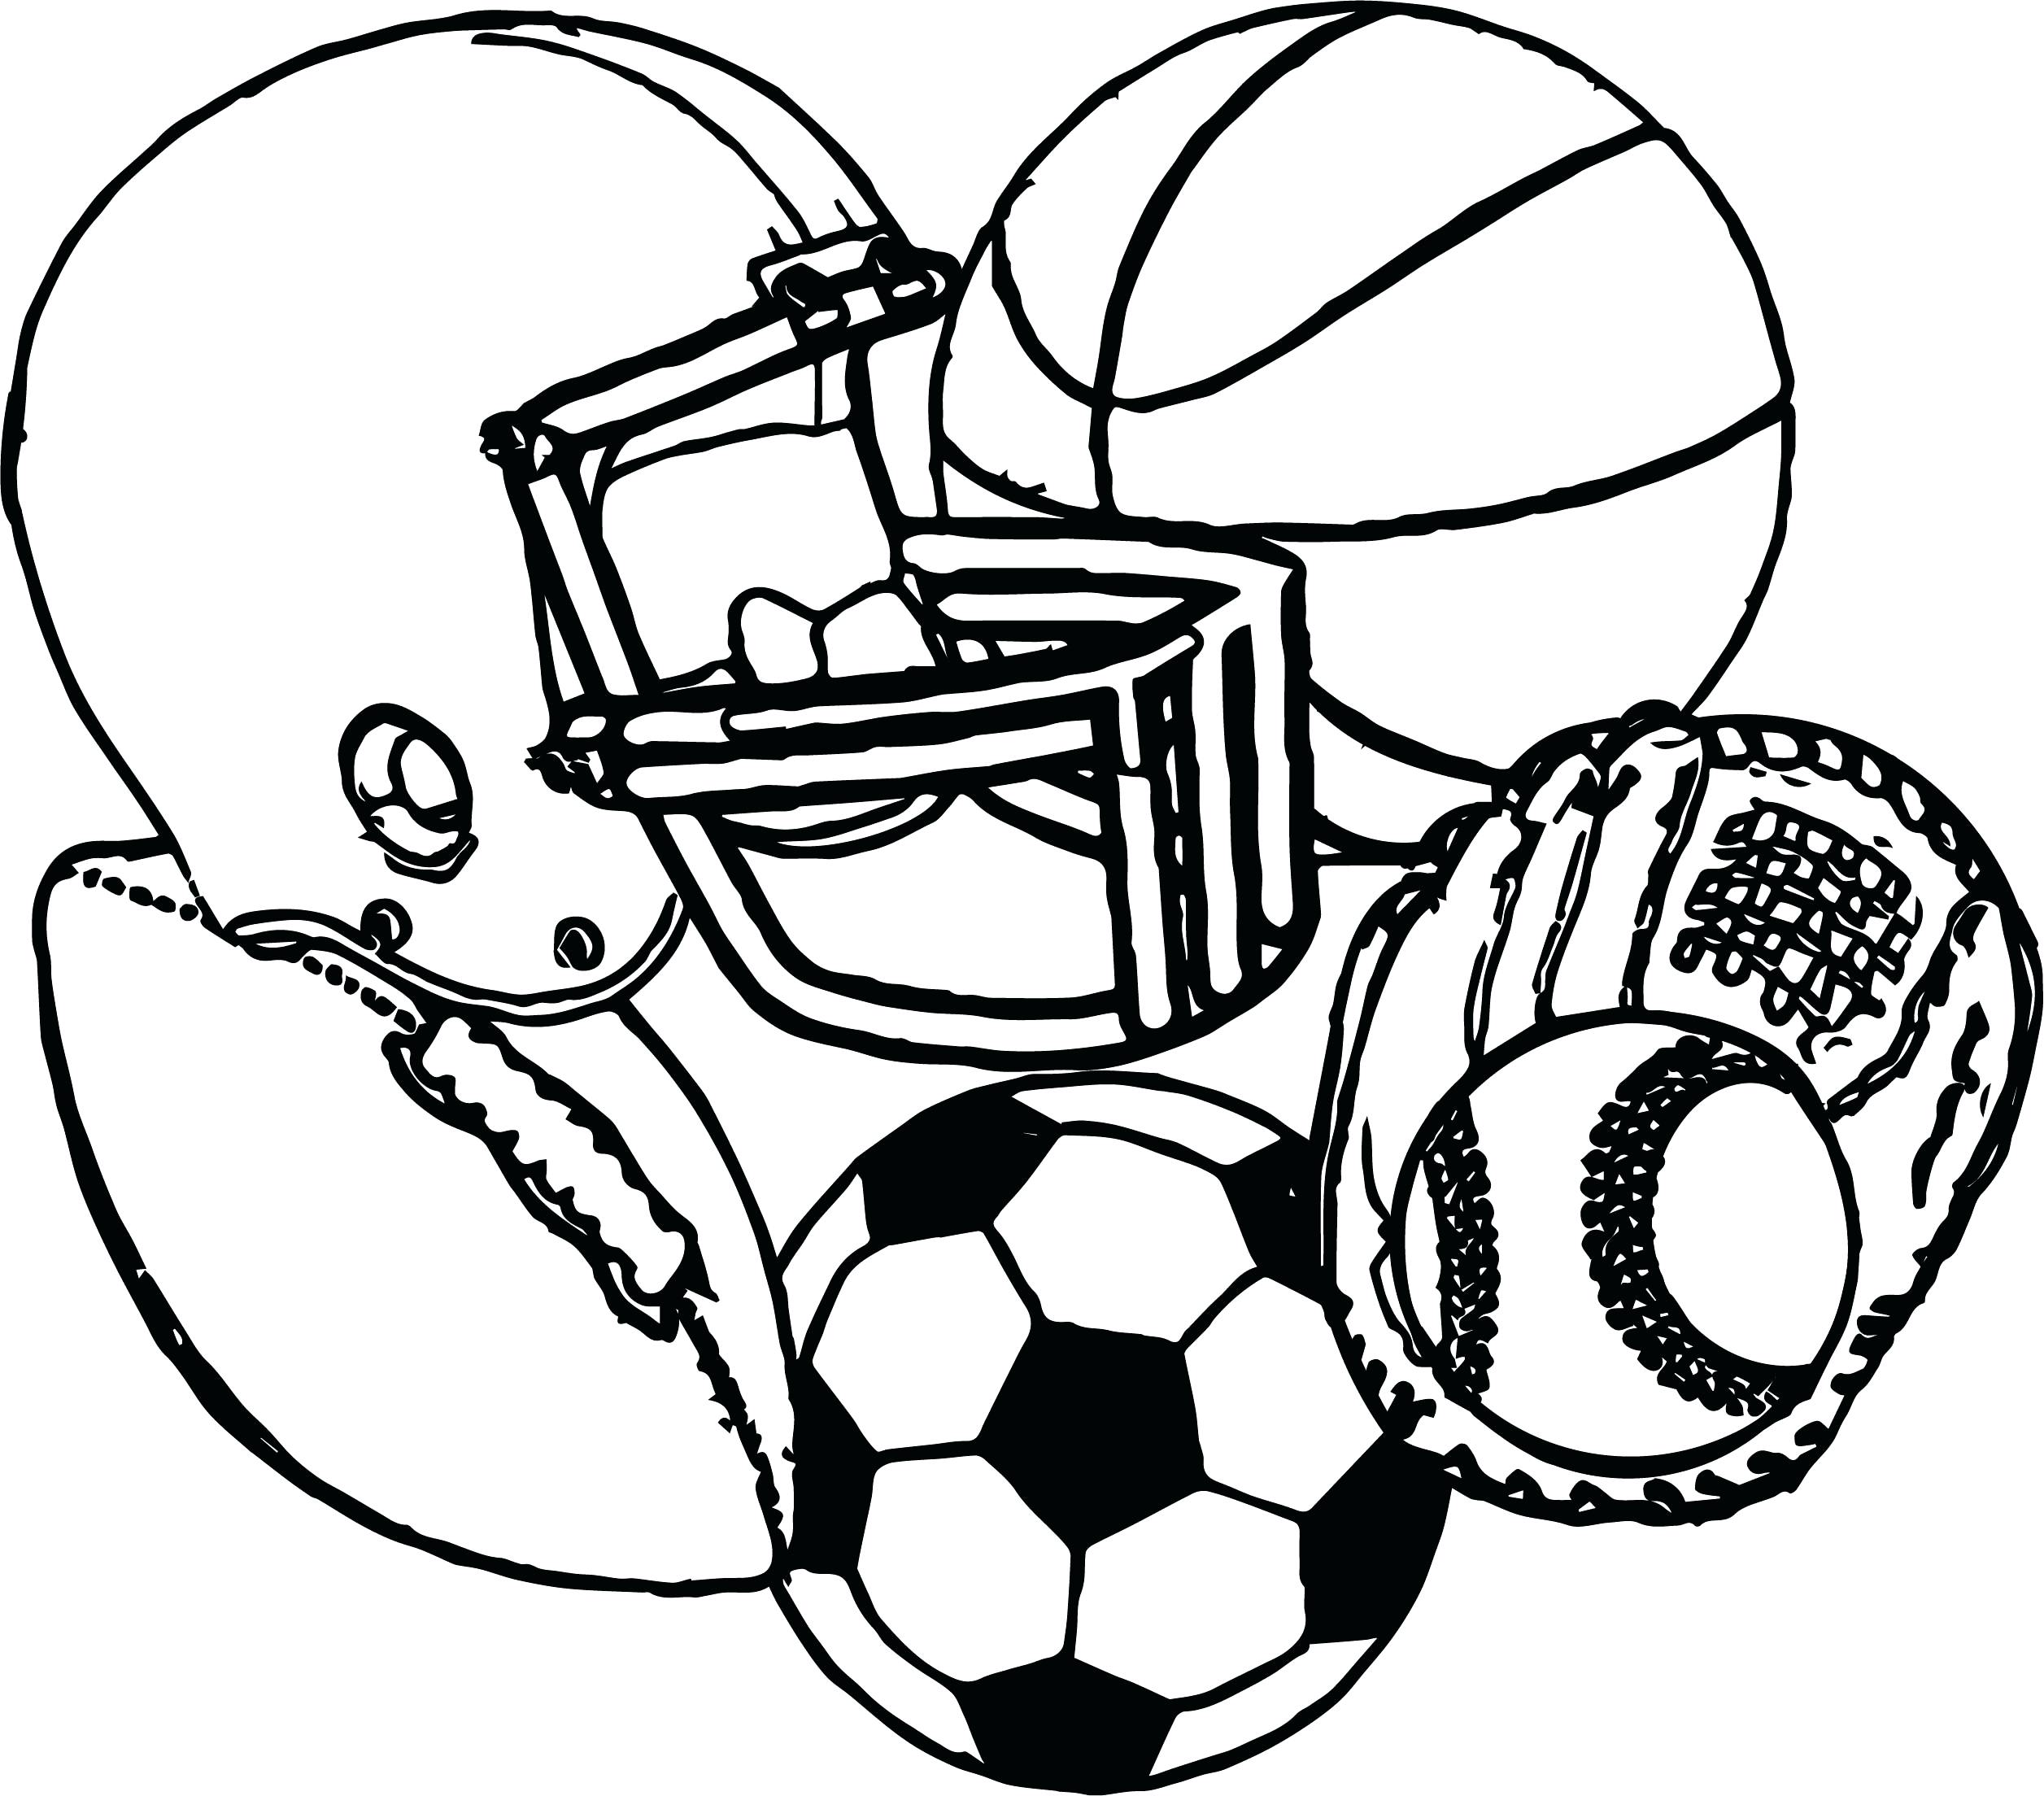 sports-equipment-drawing-at-getdrawings-free-download